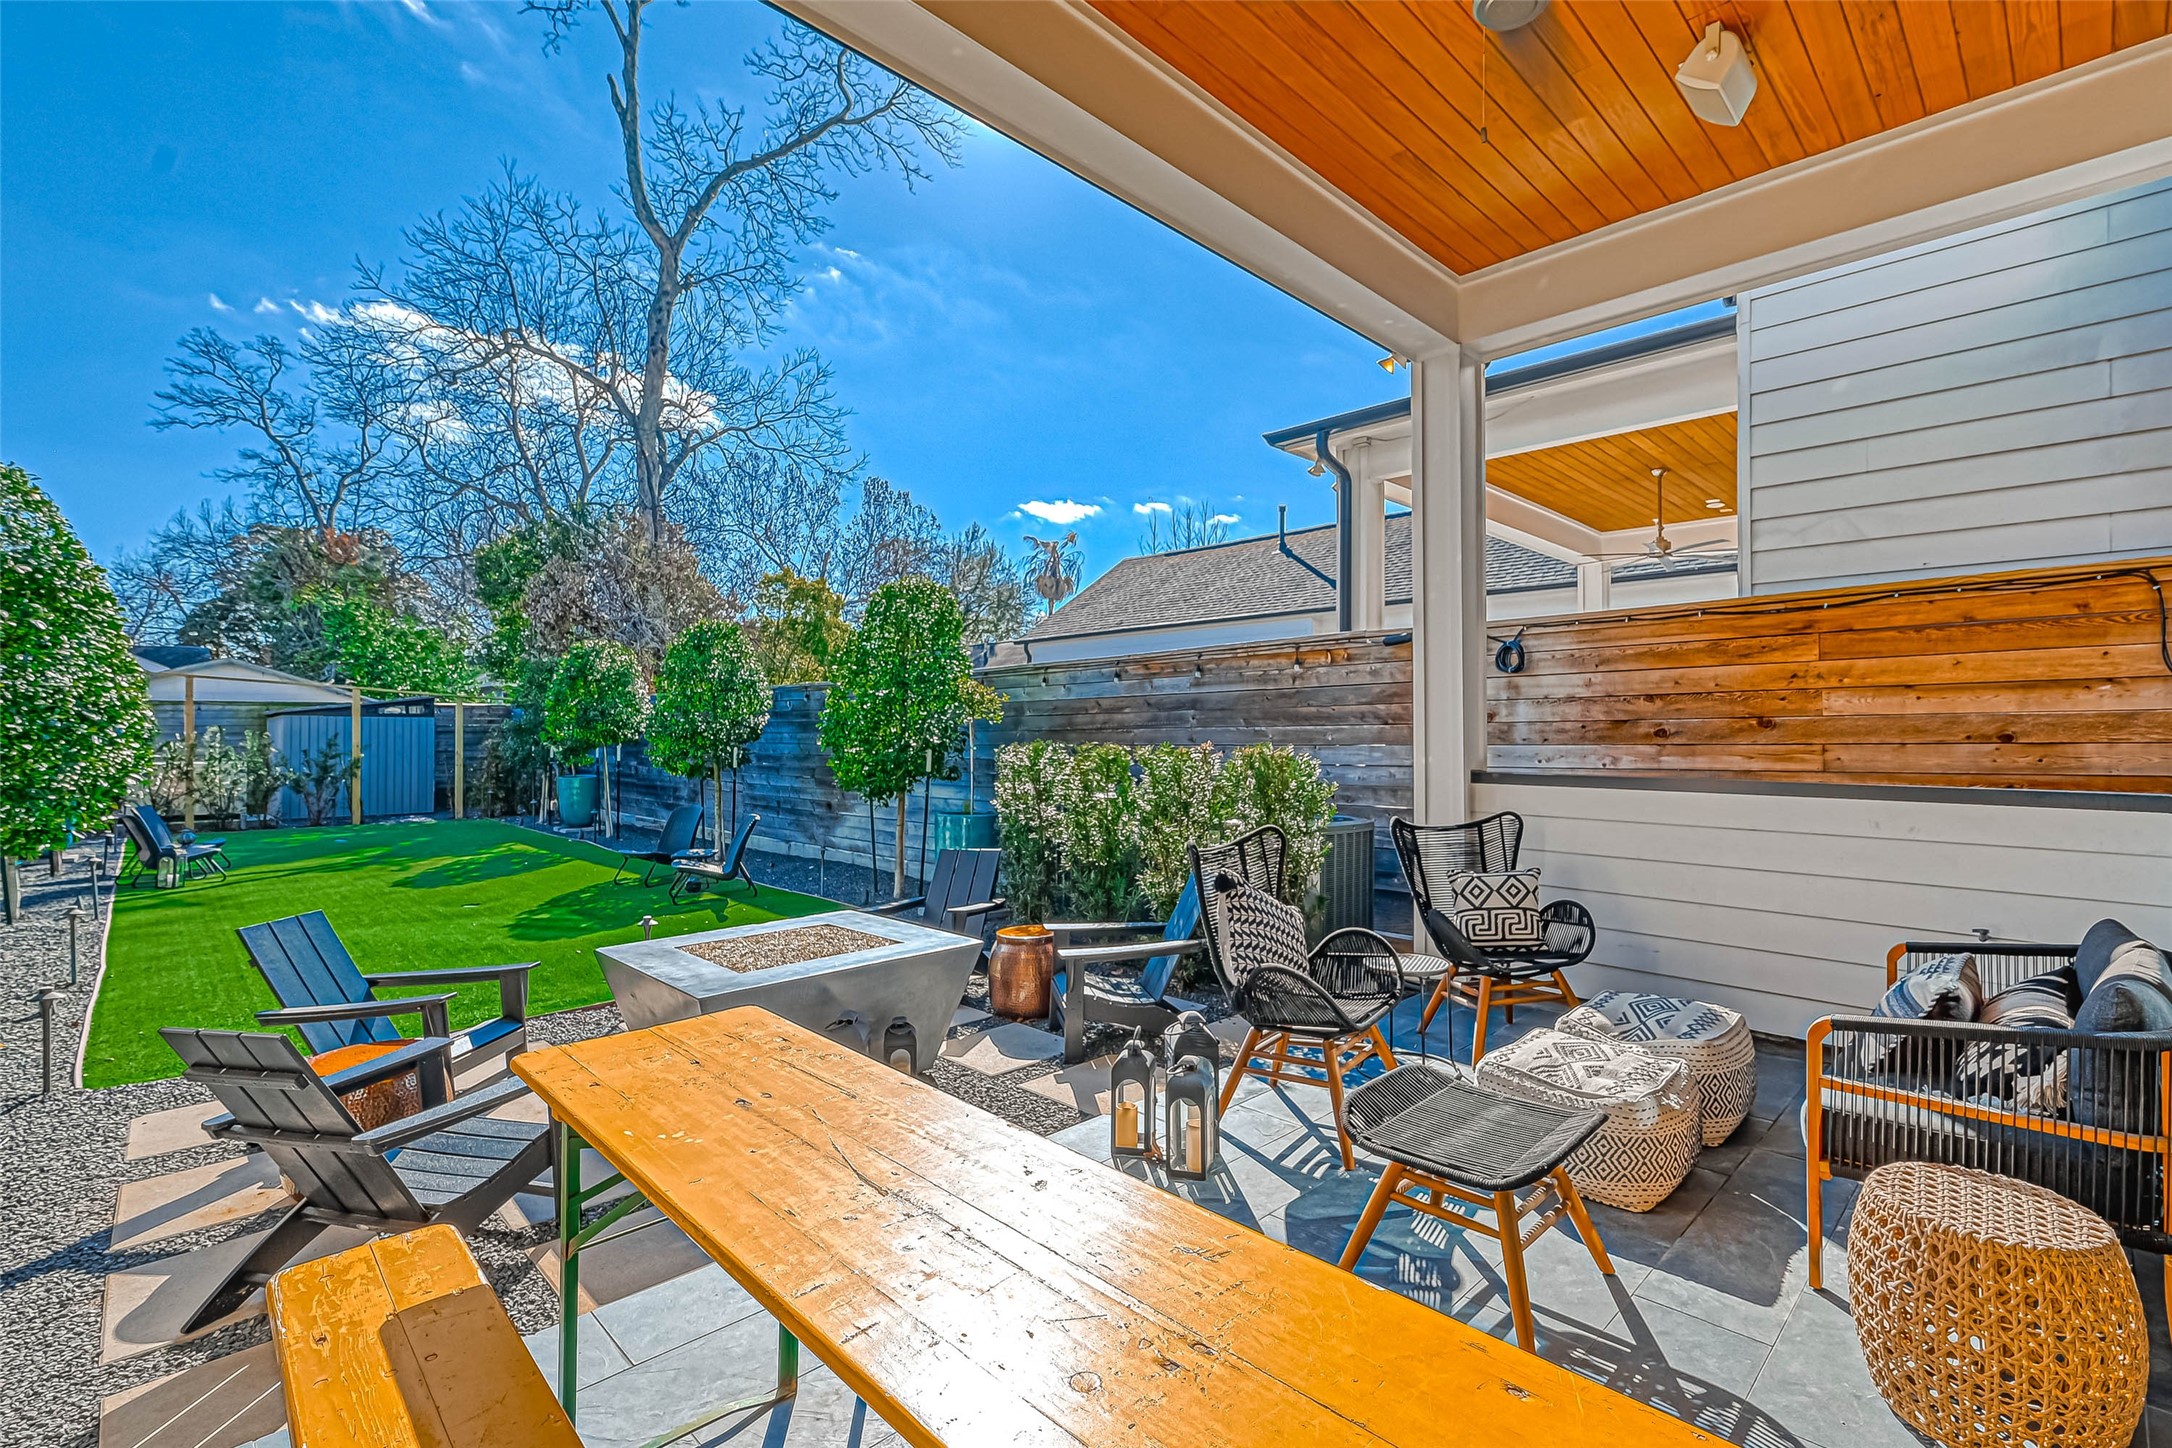 The covered backyard patio is a comfortable area to gather with friends. Add some outdoor
seating and perhaps a grill and you’ll be set to host a barbecue.